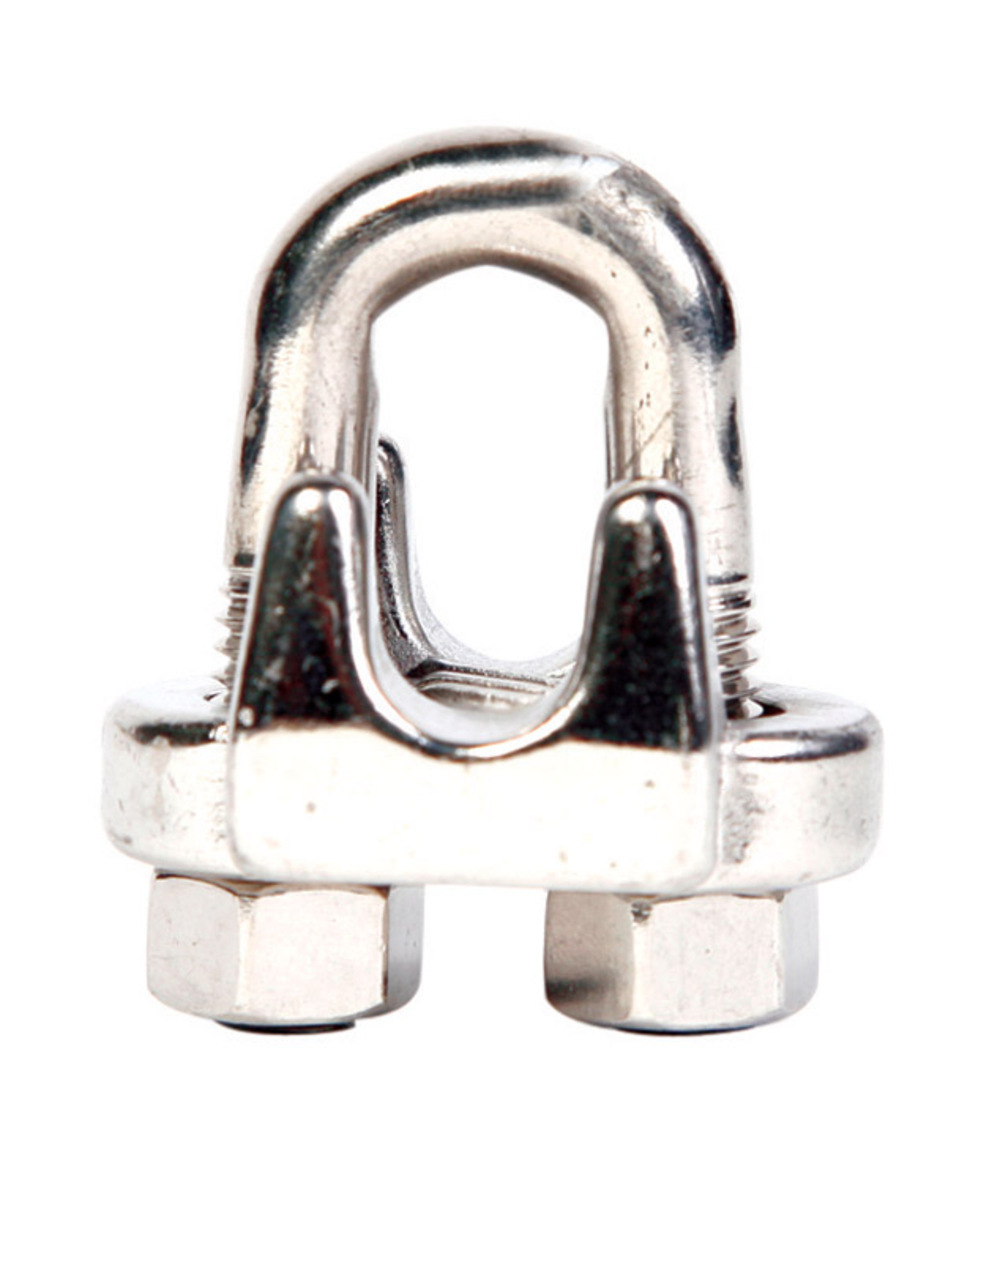 Campbell Polished Stainless Steel Wire Rope Clip - image 2 of 2